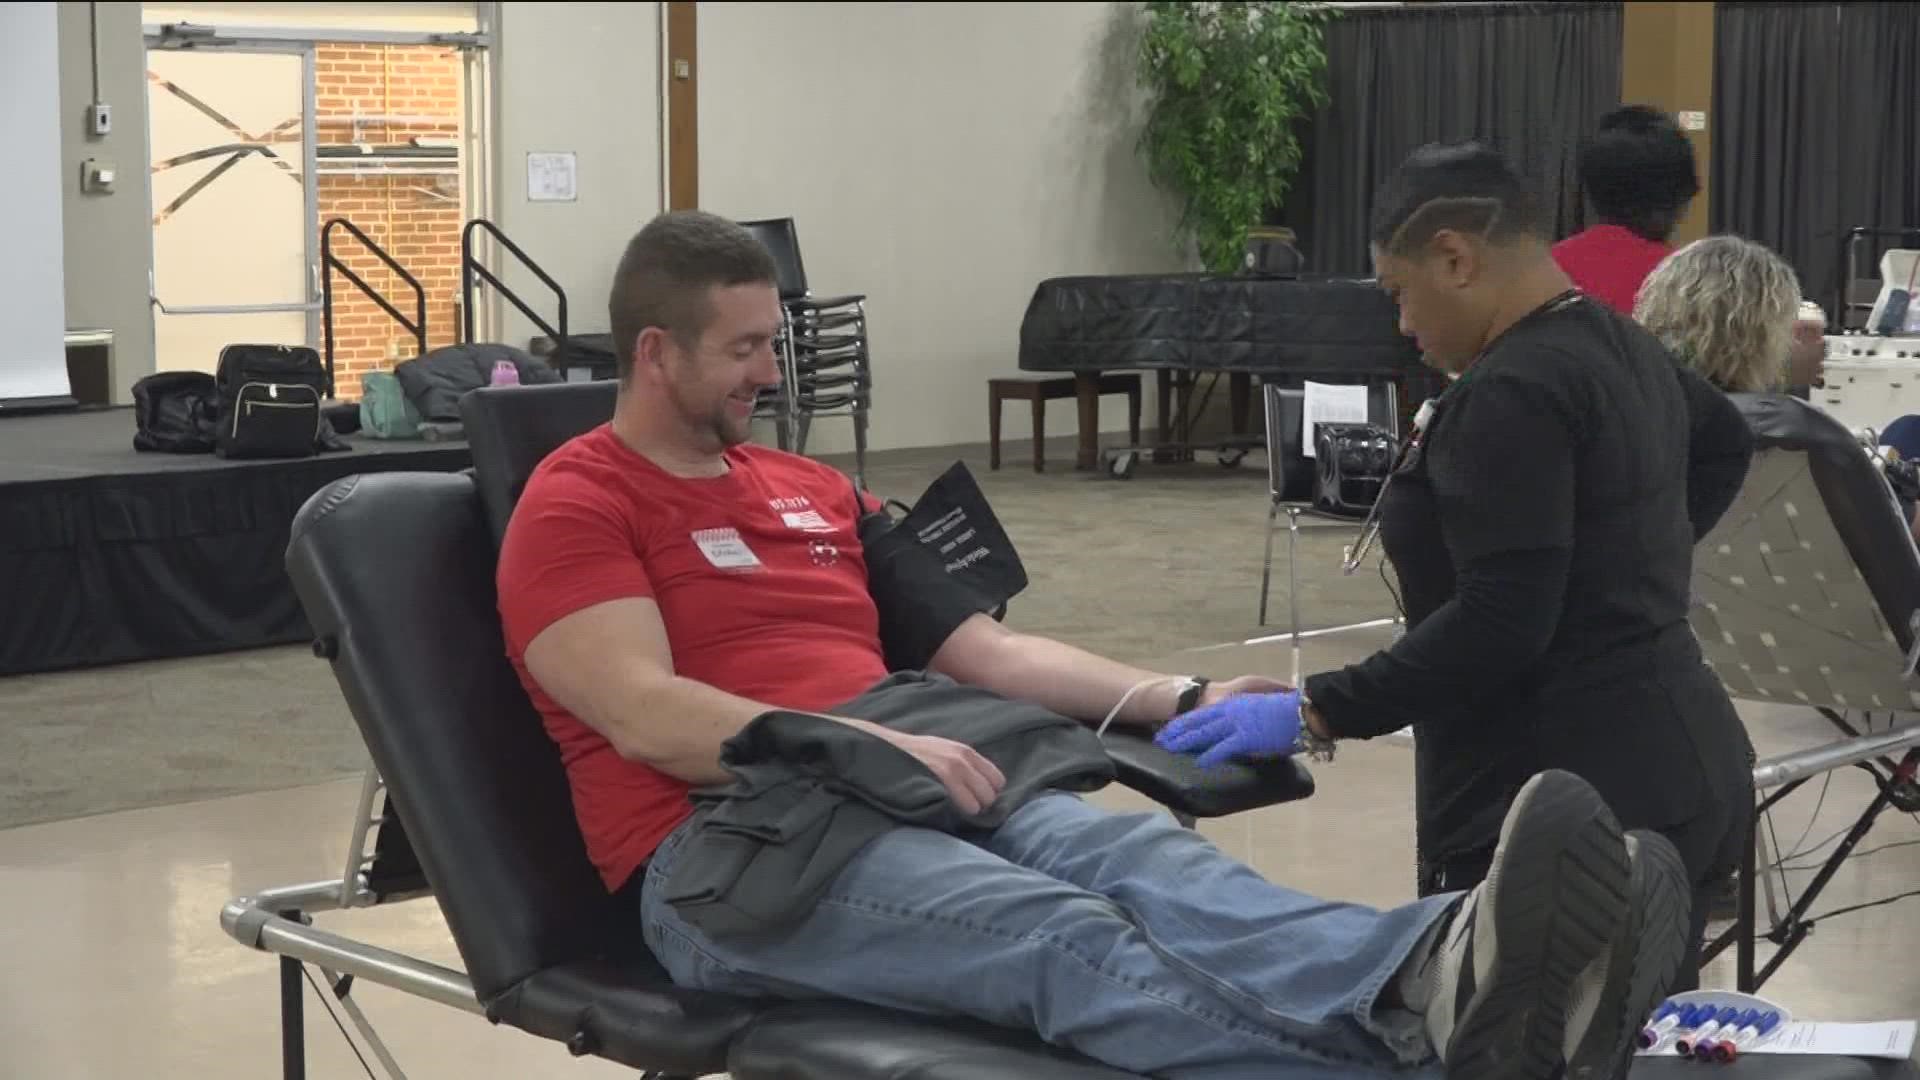 The blood drive in Findlay drew members of the community to donate during one of the most critical times of the year for the Red Cross' blood supply.